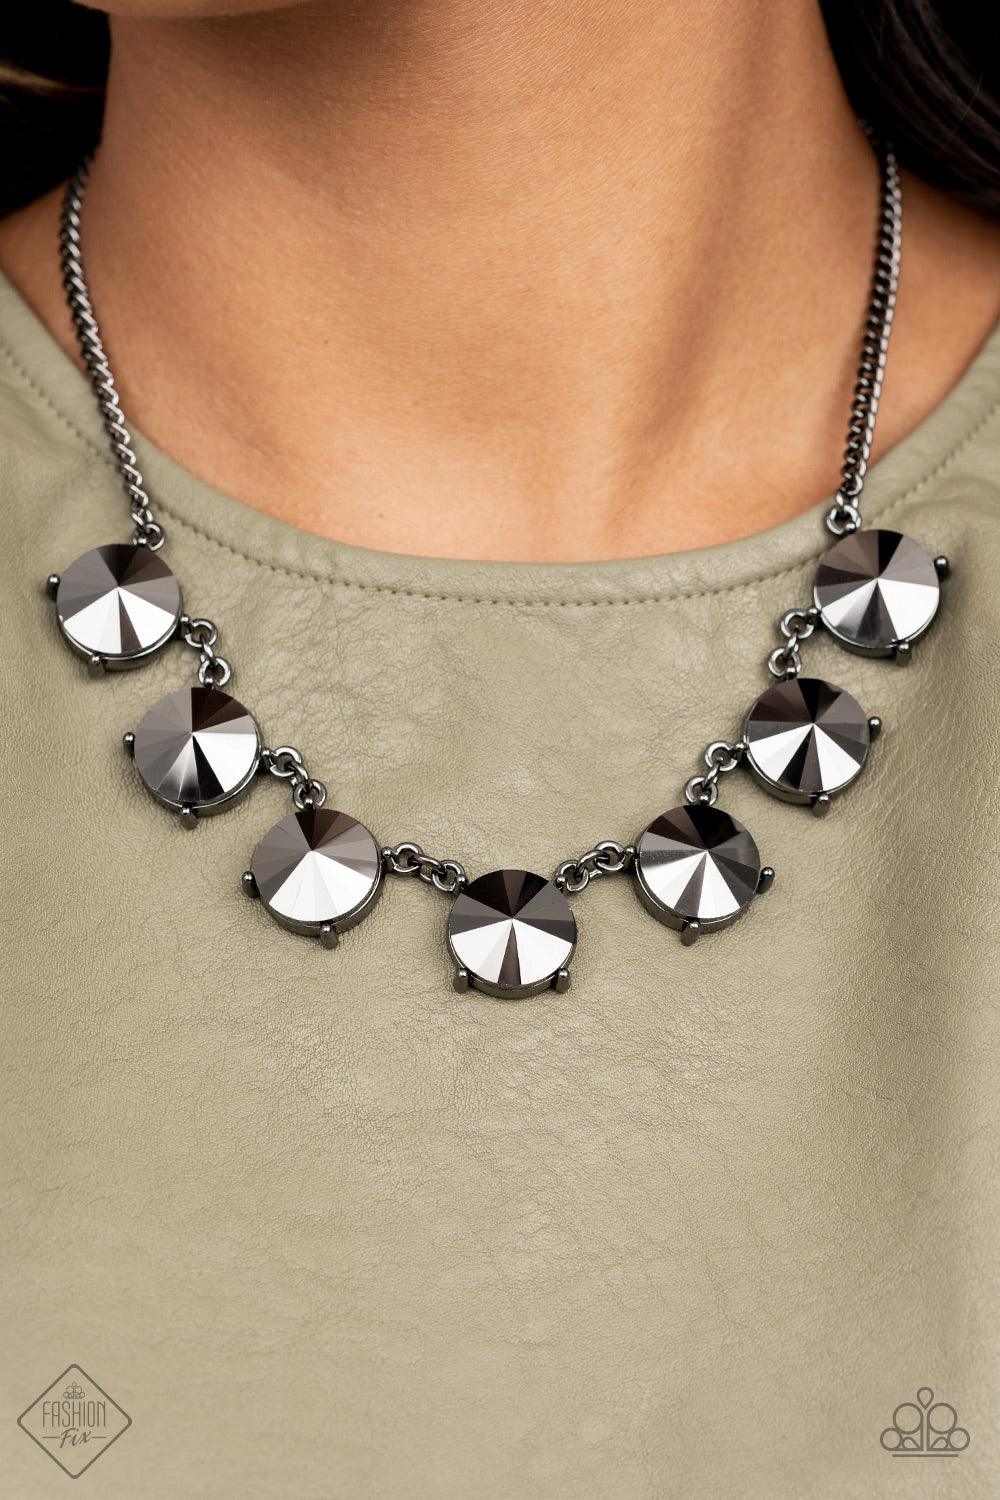 Paparazzi Accessories The SHOWCASE Must Go On - Black Attached to glistening gunmetal chains, a dramatic collection of oversized hematite rhinestones boldly links into a smoldering statement piece below the collar. Features an adjustable clasp closure. So